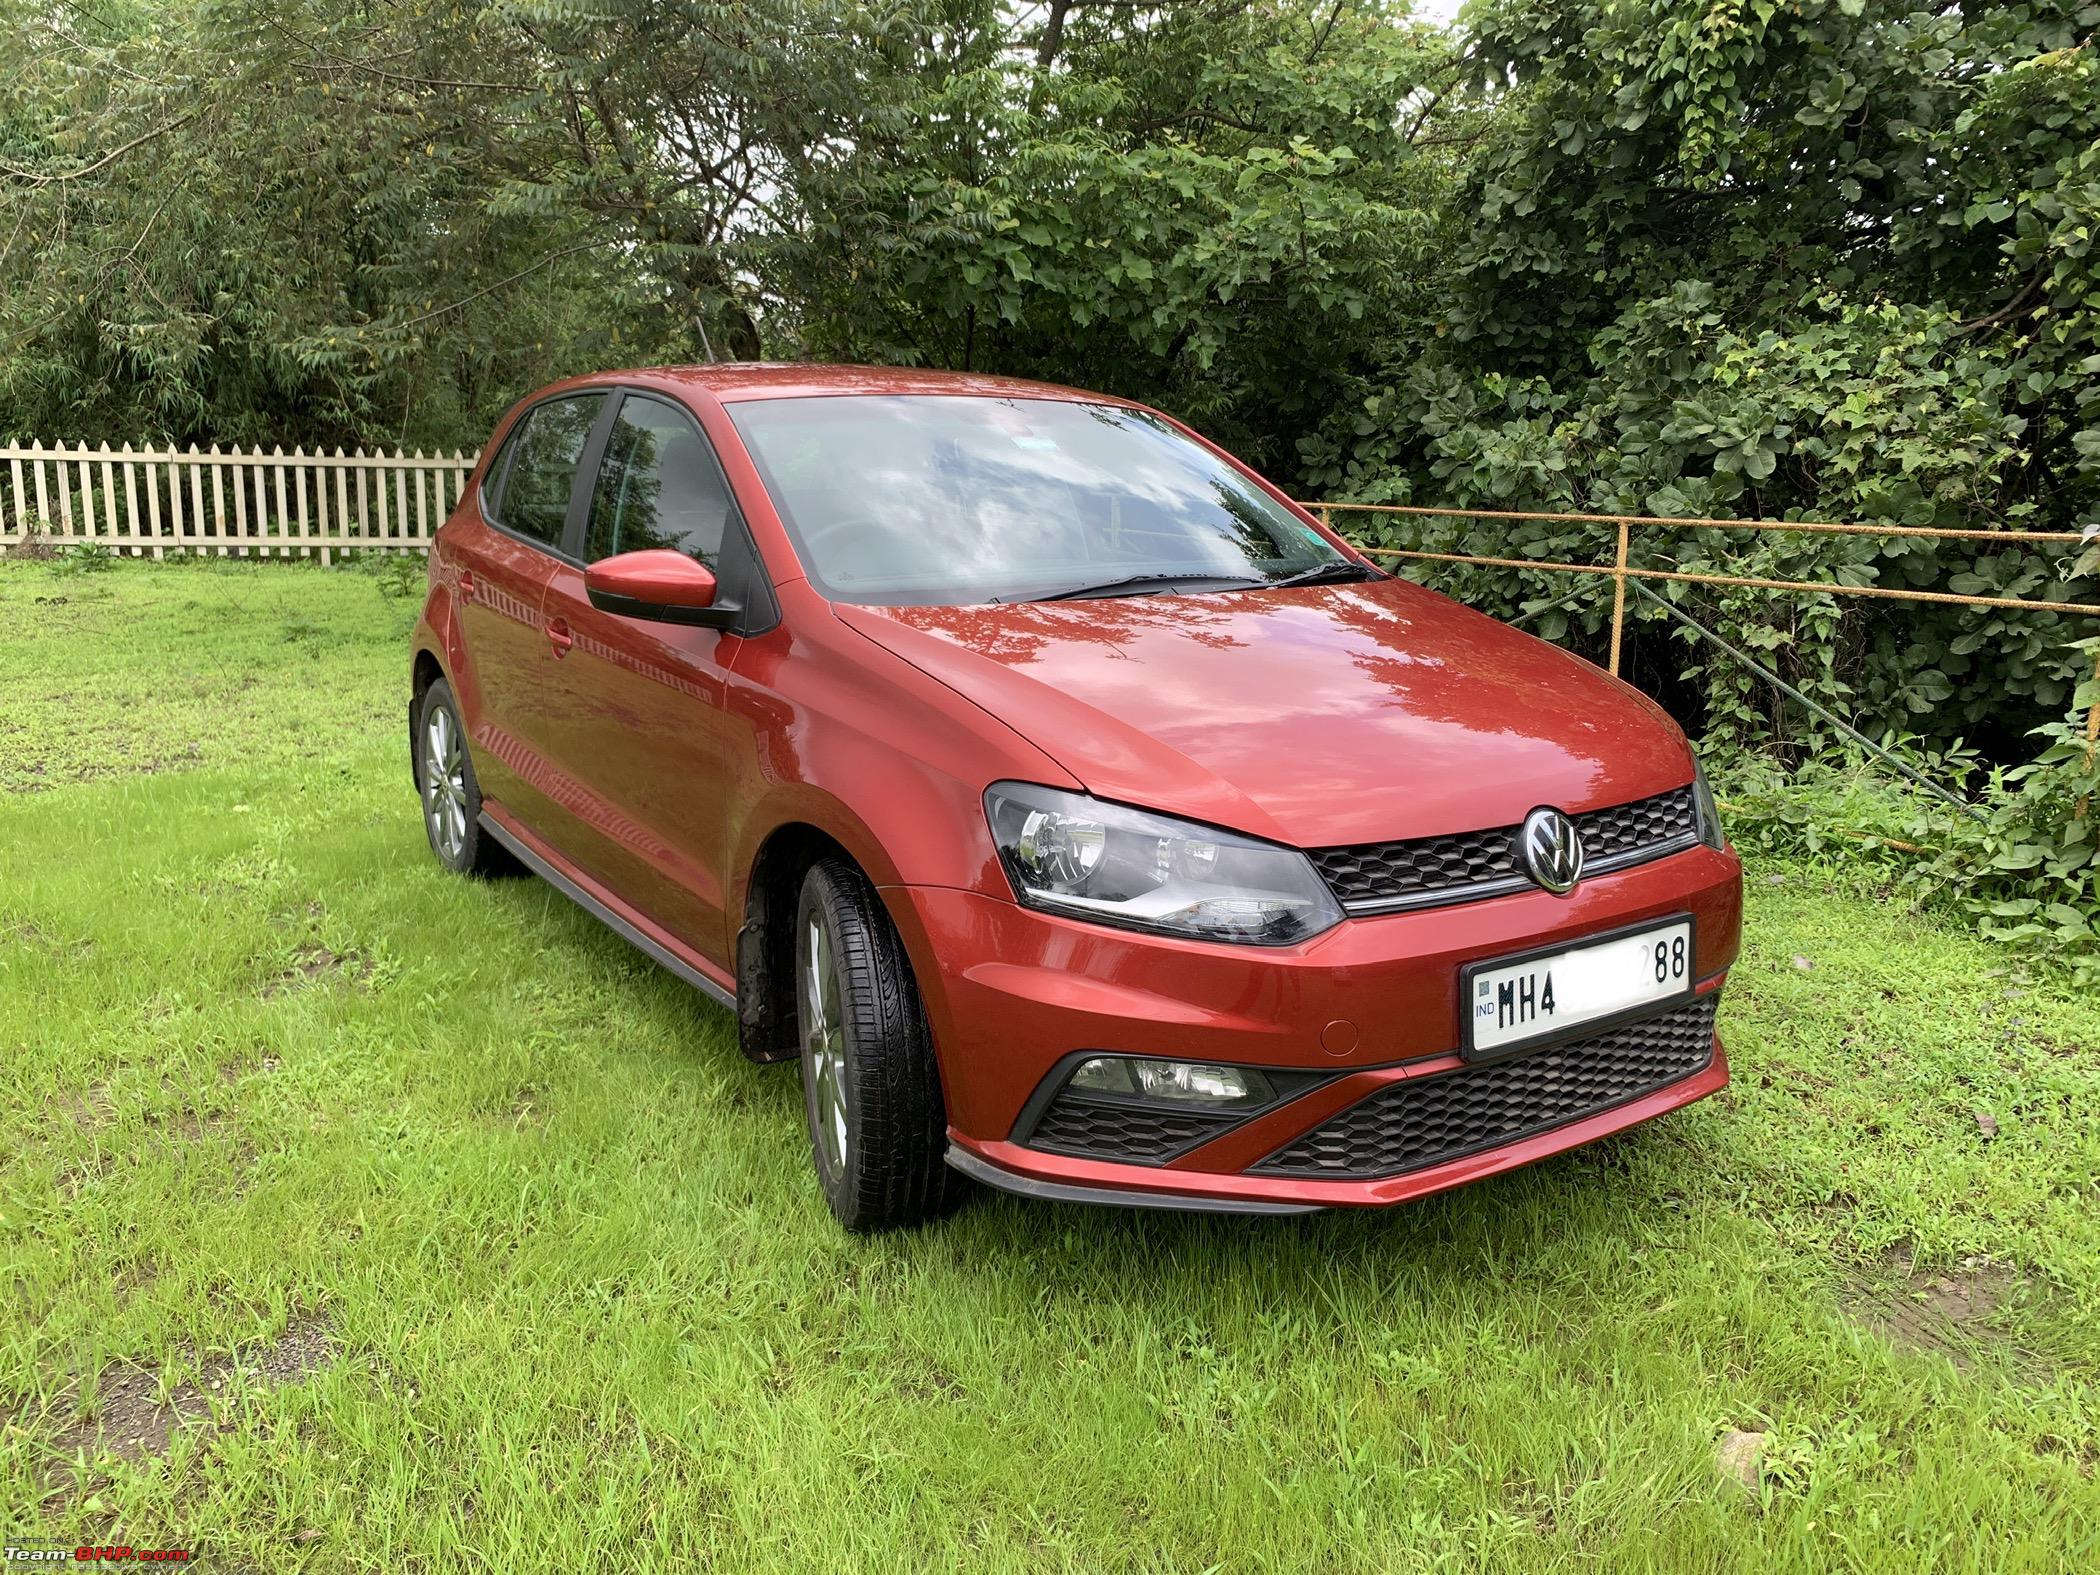 Volkswagen Polo 1.0L TSI : Official Review - Page 27 - Team-BHP